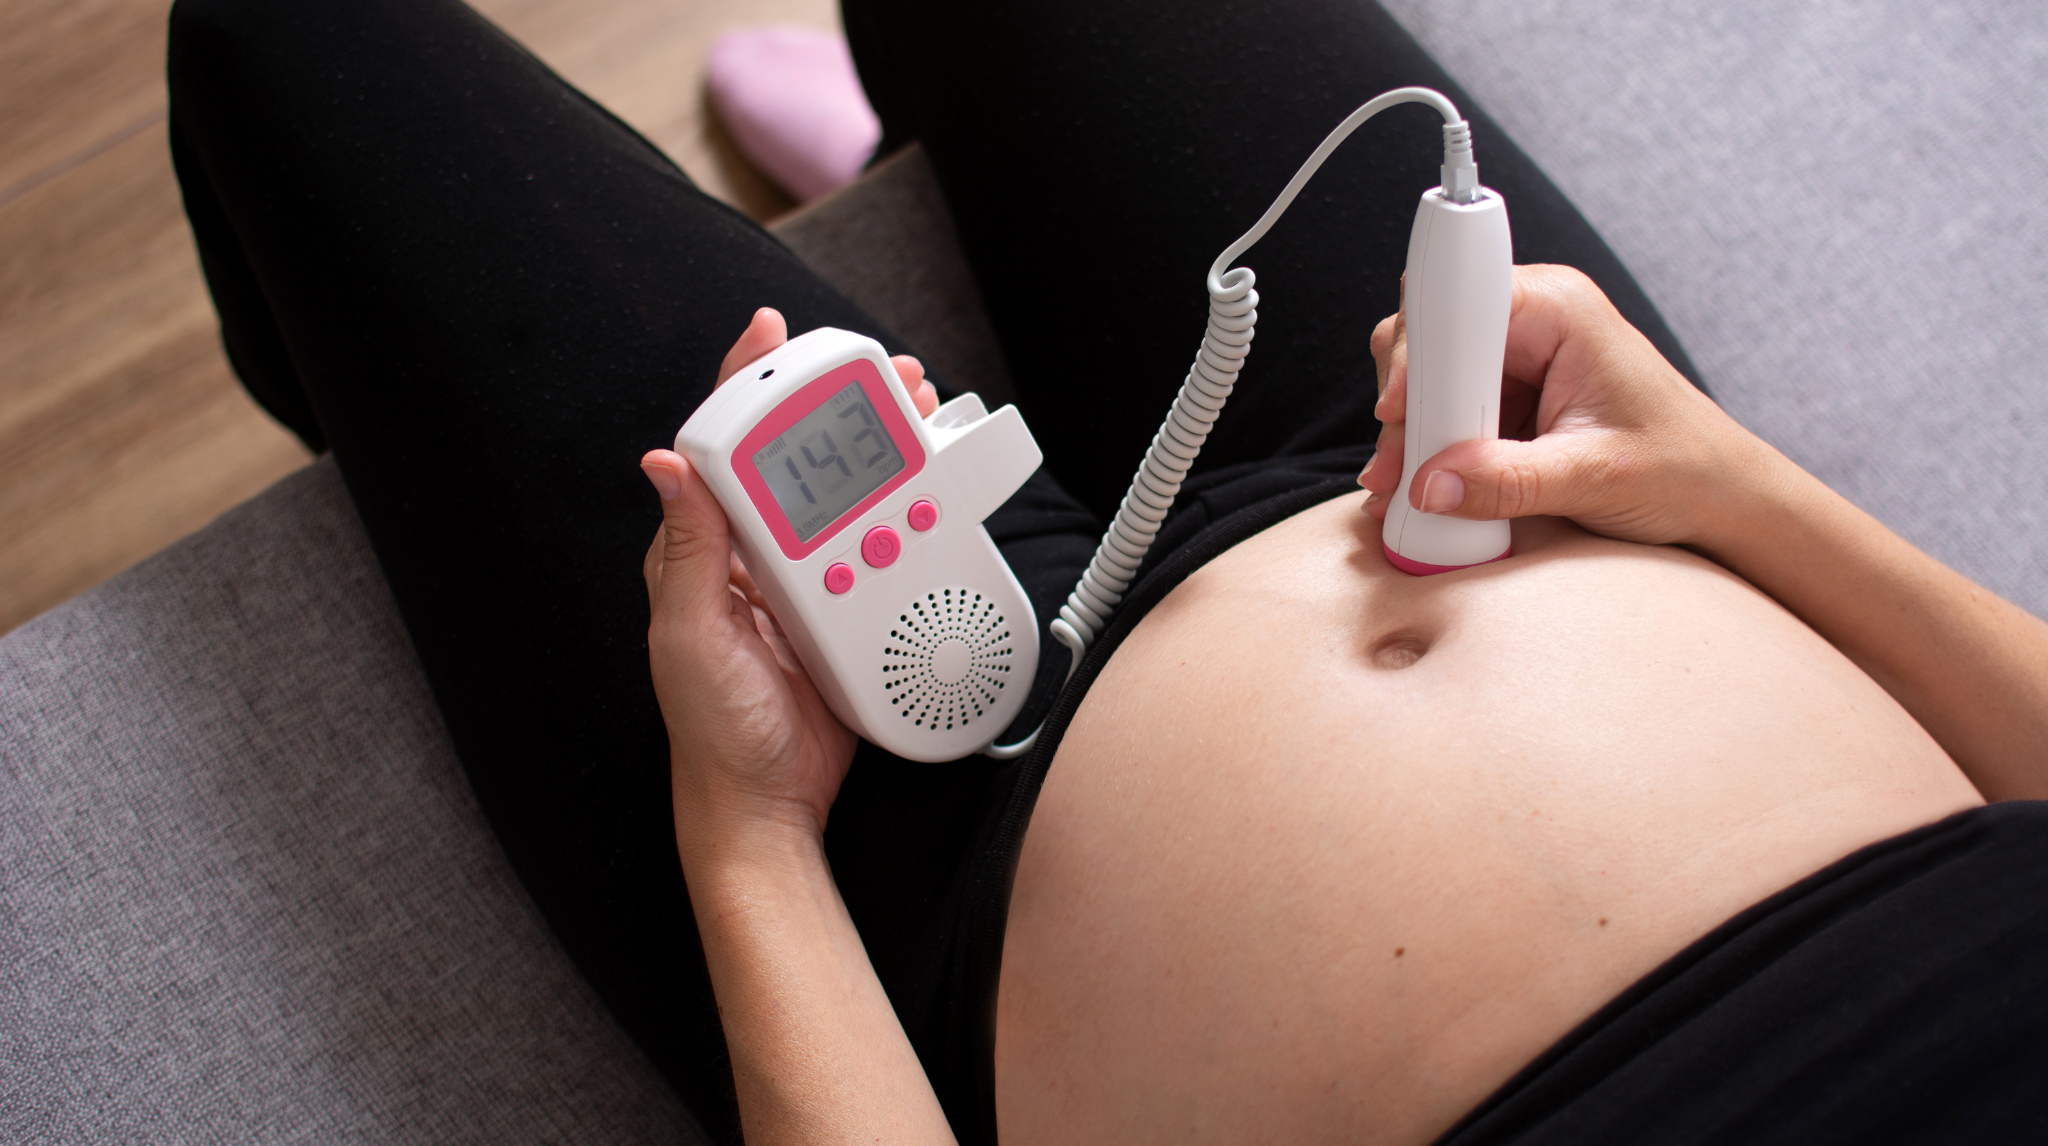 Fetal Doppler: When It Is Used, How It Works, Safety